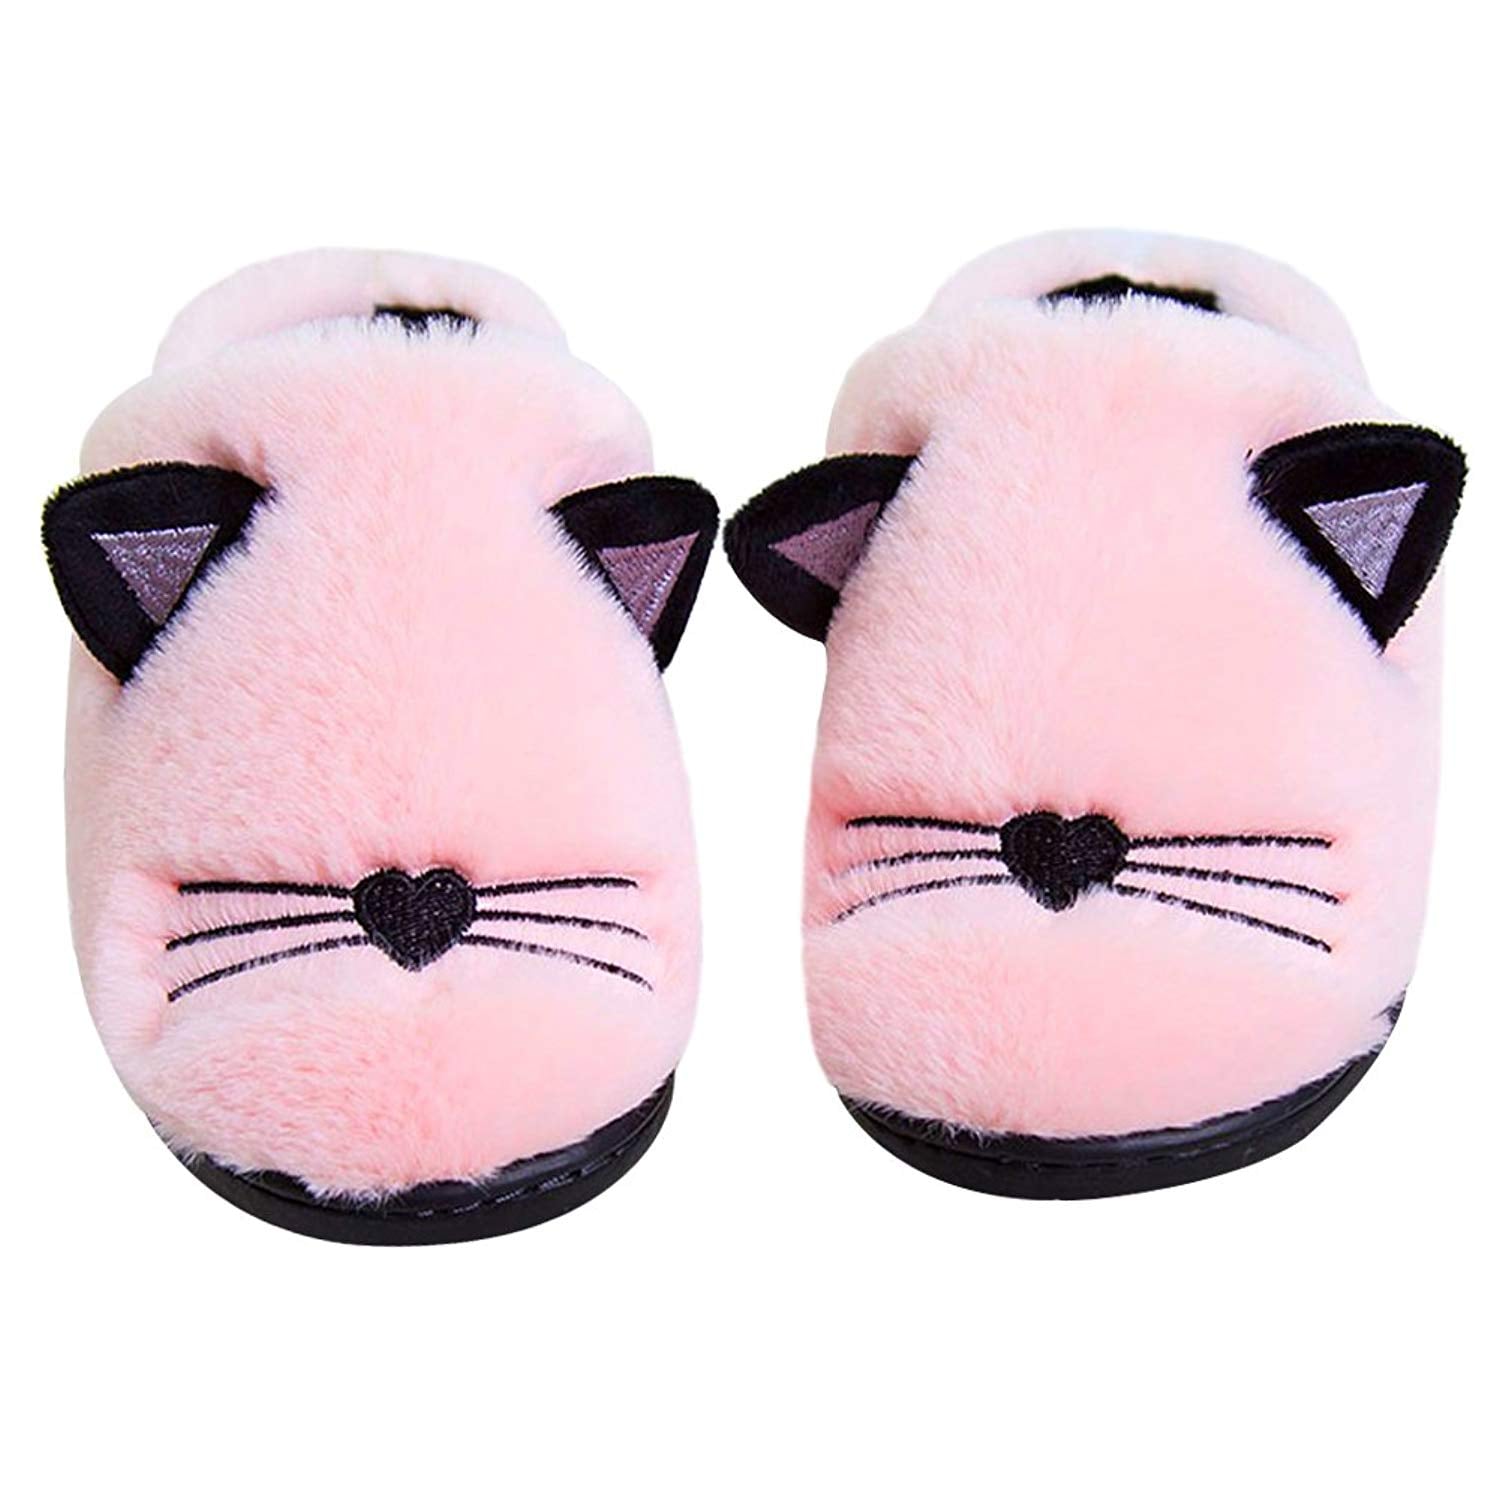 Unisex Adults/Kids Winter Cute Cat Plush Indoor Slippers Soft Home House Shoes